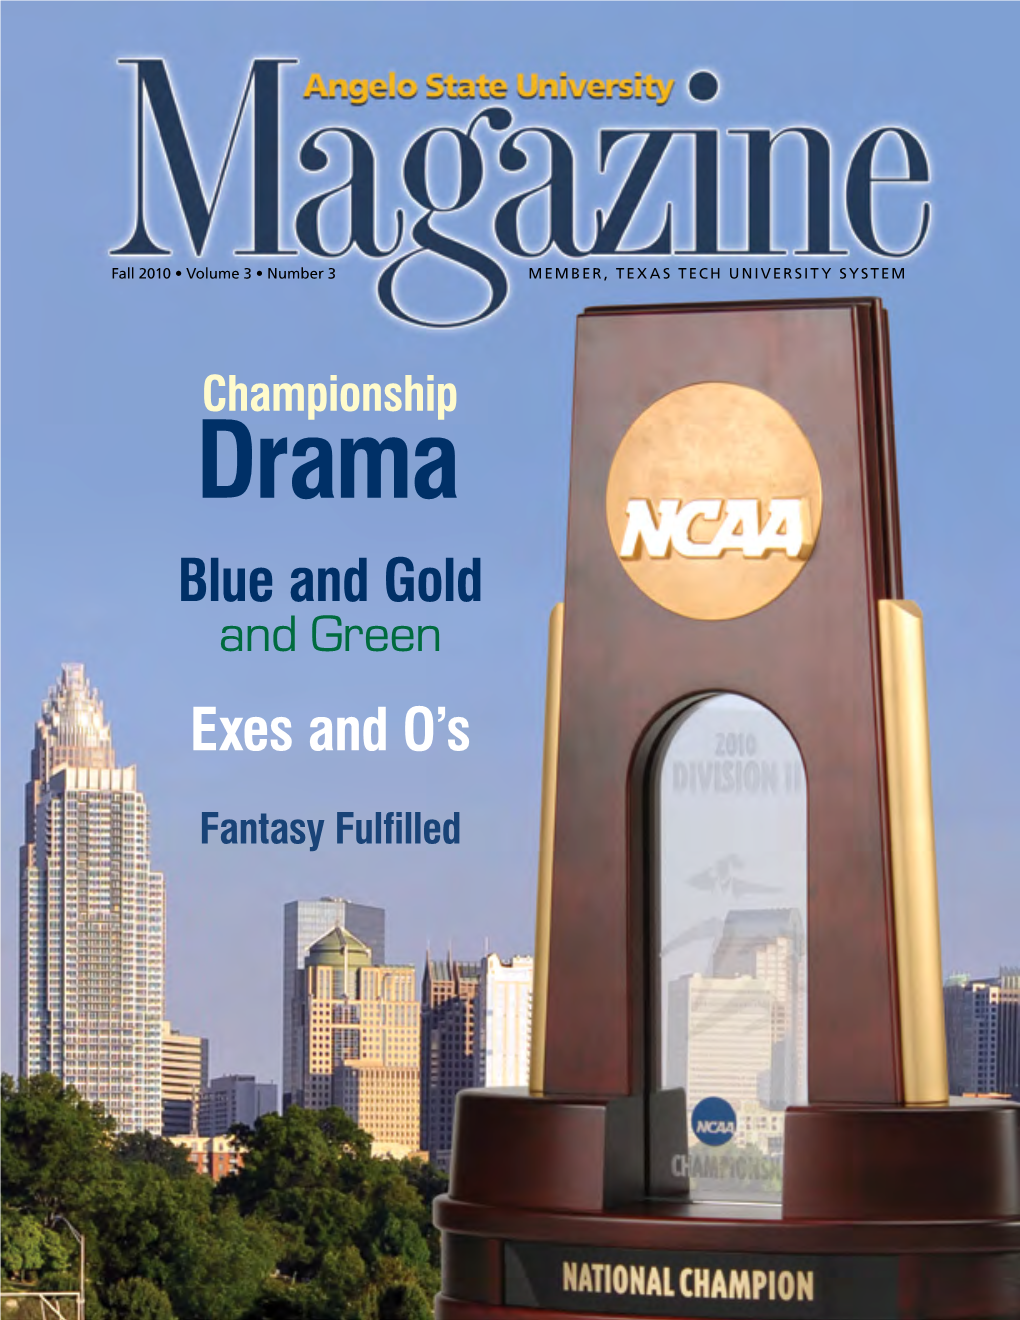 Fall 2010 • Volume 3 • Number 3 MEMBER, TEXAS TECH UNIVERSITY SYSTEM from the President Angelo State University Cover Story Dear Friends: Championship Drama